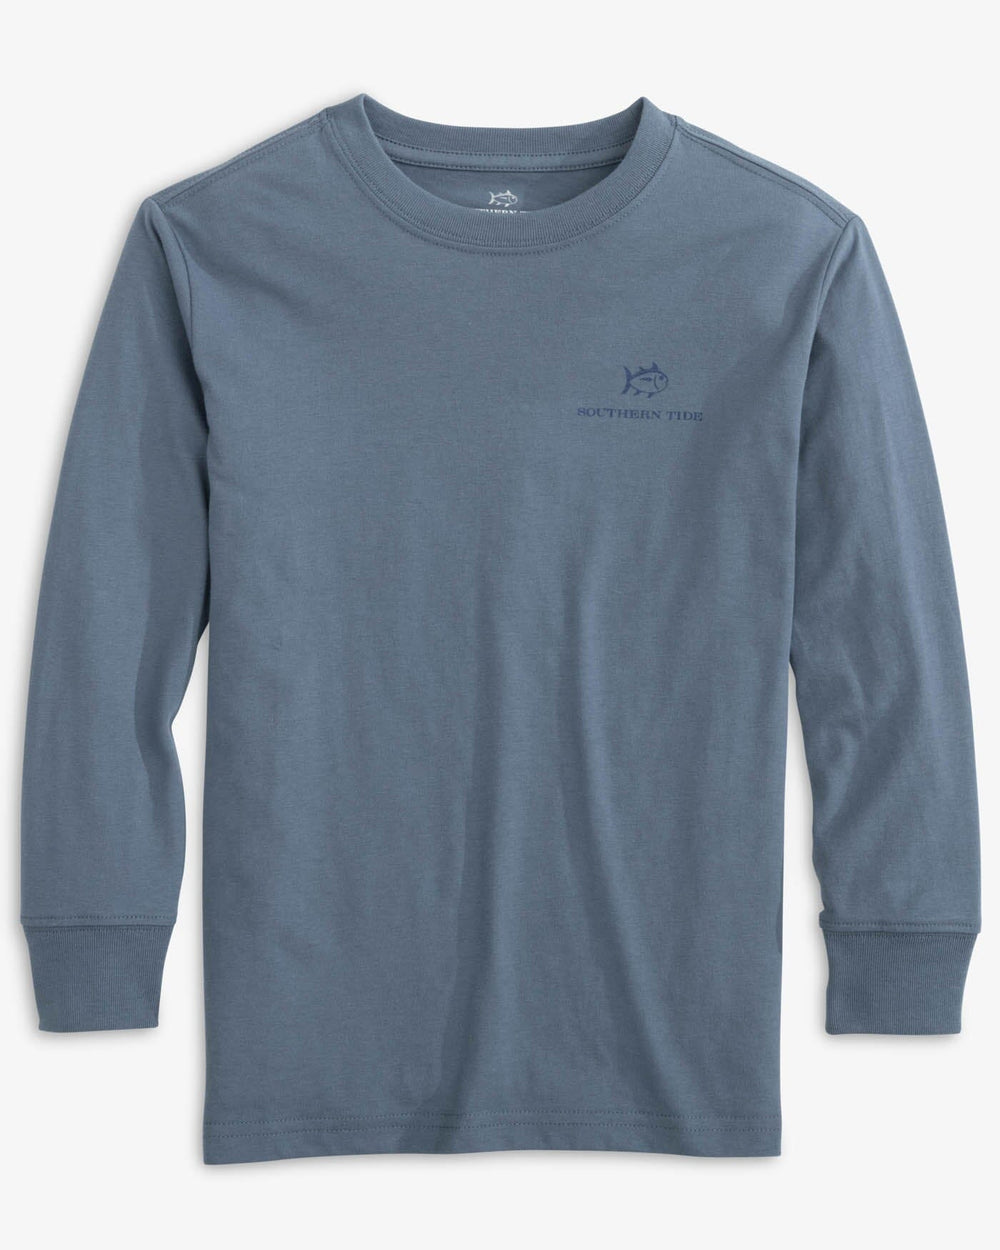 The front view of the Southern Tide Kids On Board for Off Roads Long Sleeve T-Shirt by Southern Tide - Blue Haze